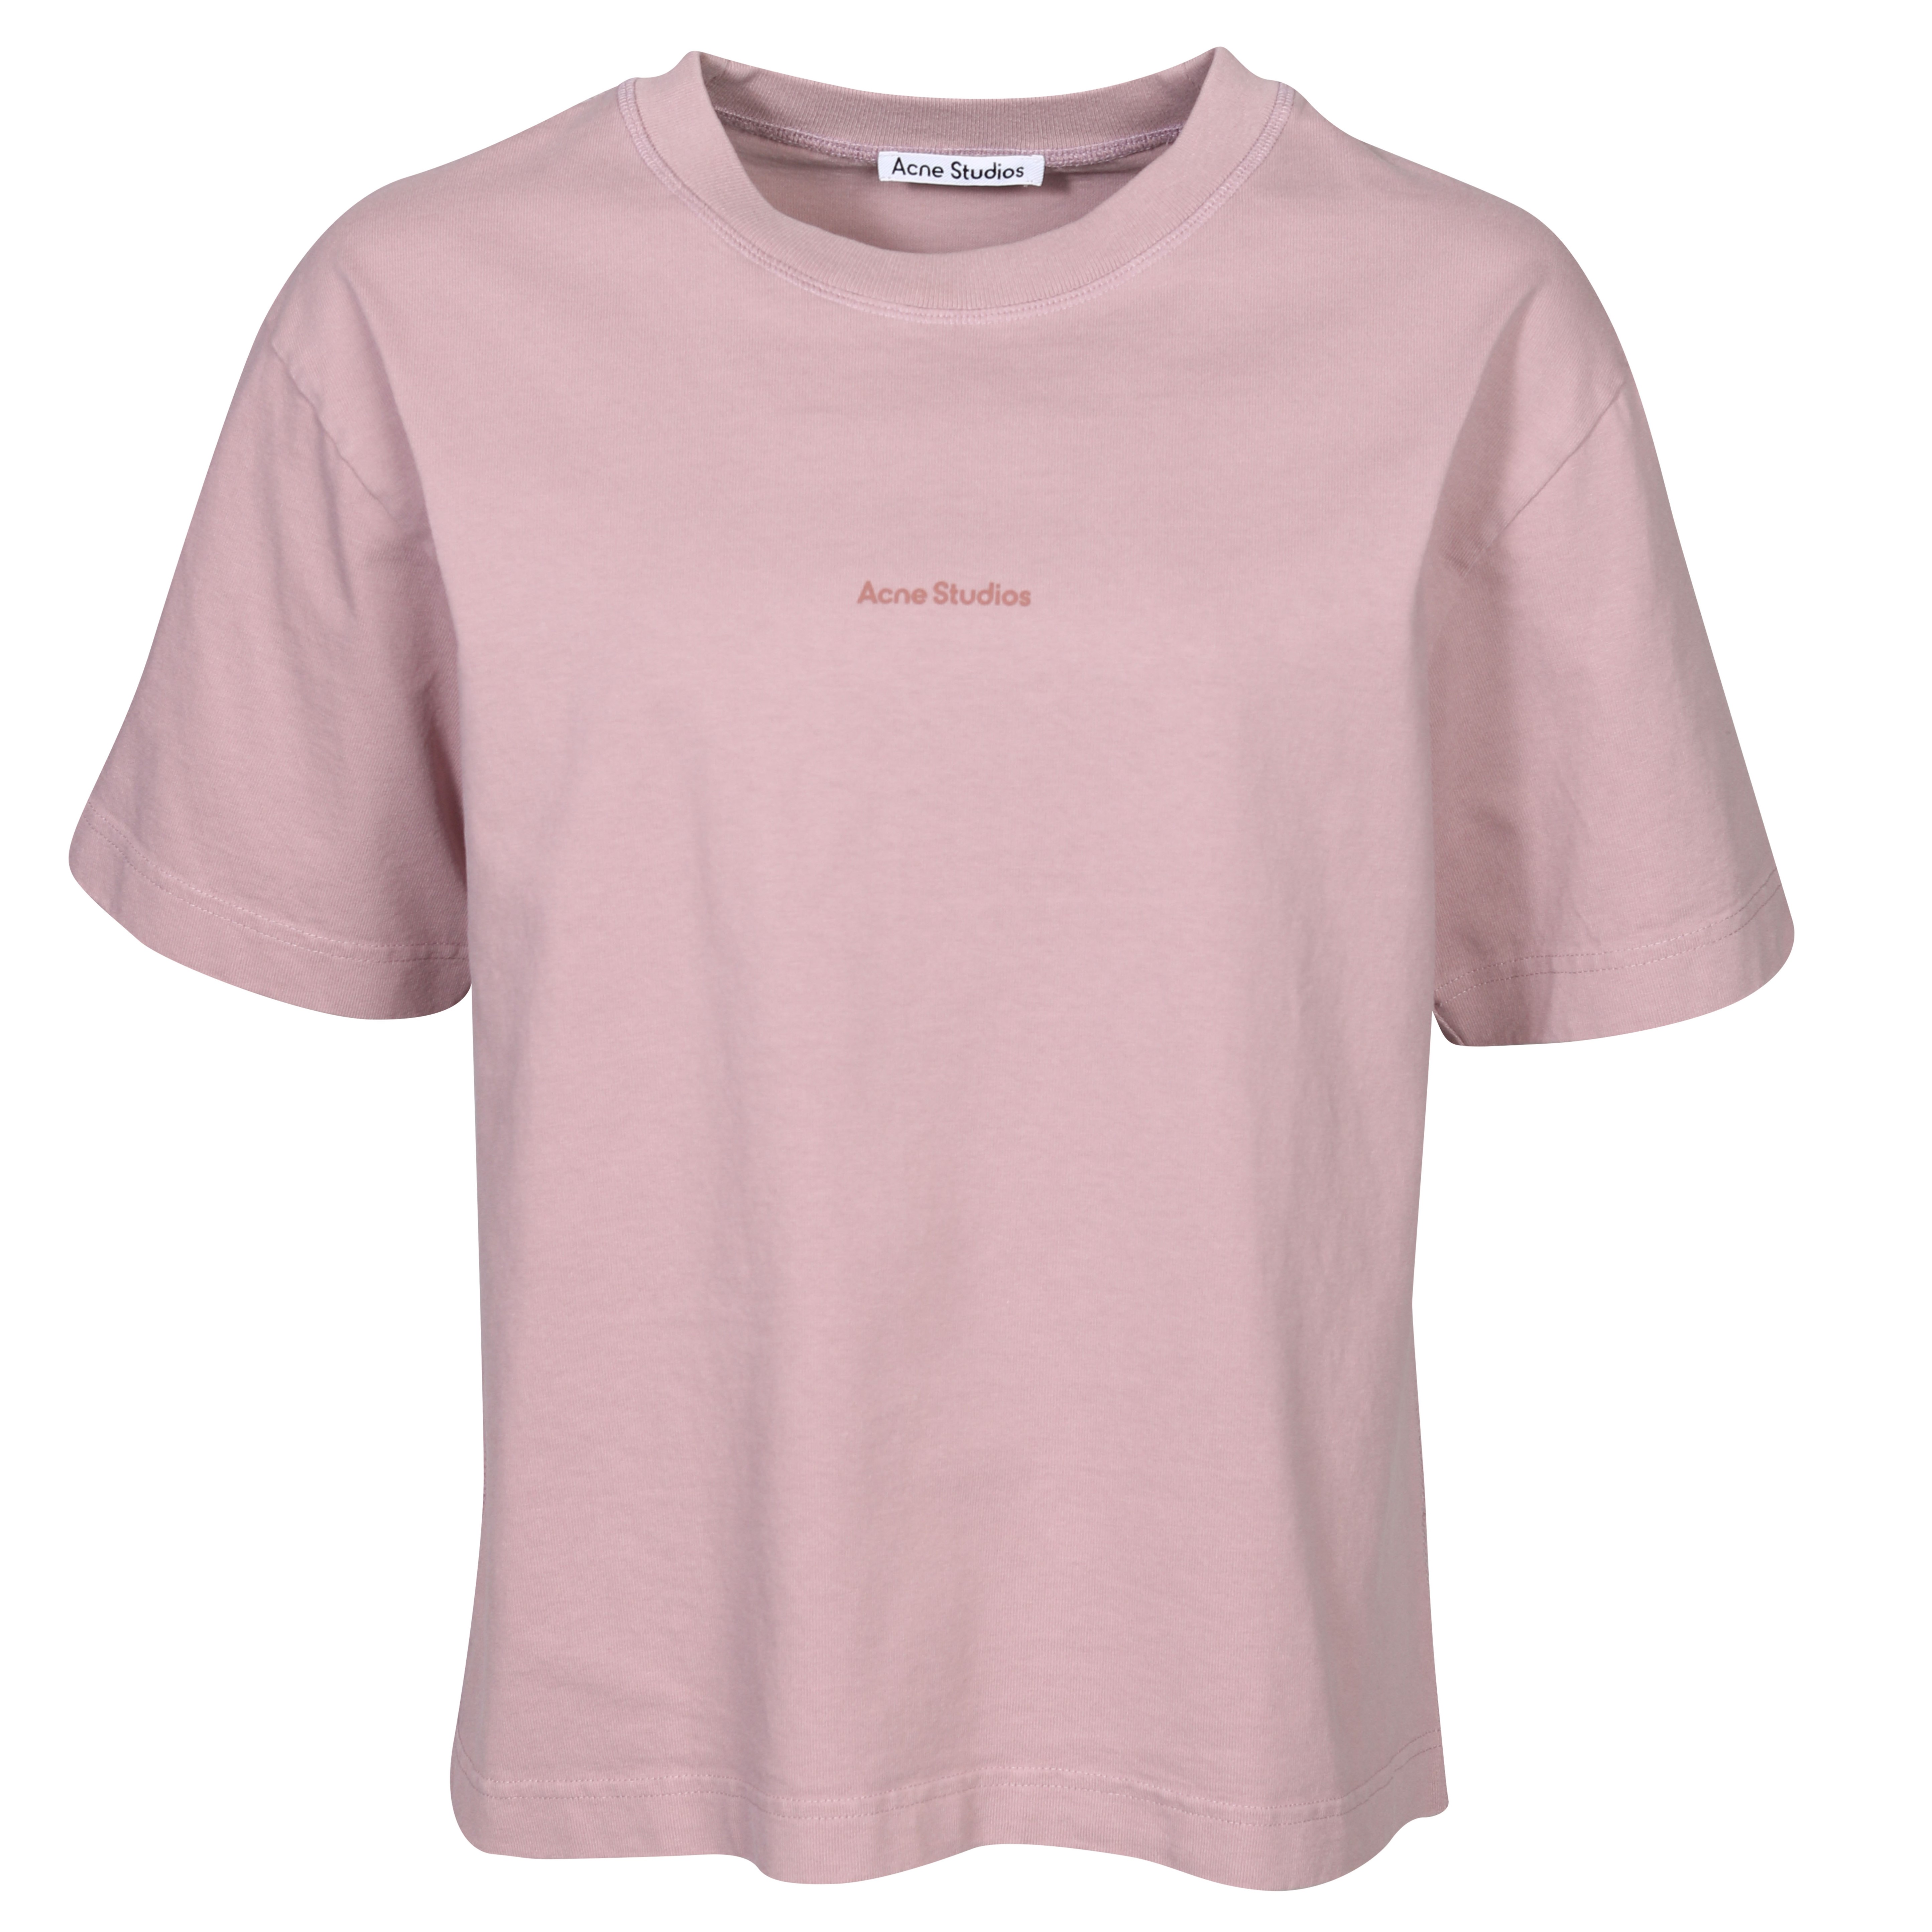 Acne Studios Stamp T-Shirt in Mauve Pink S